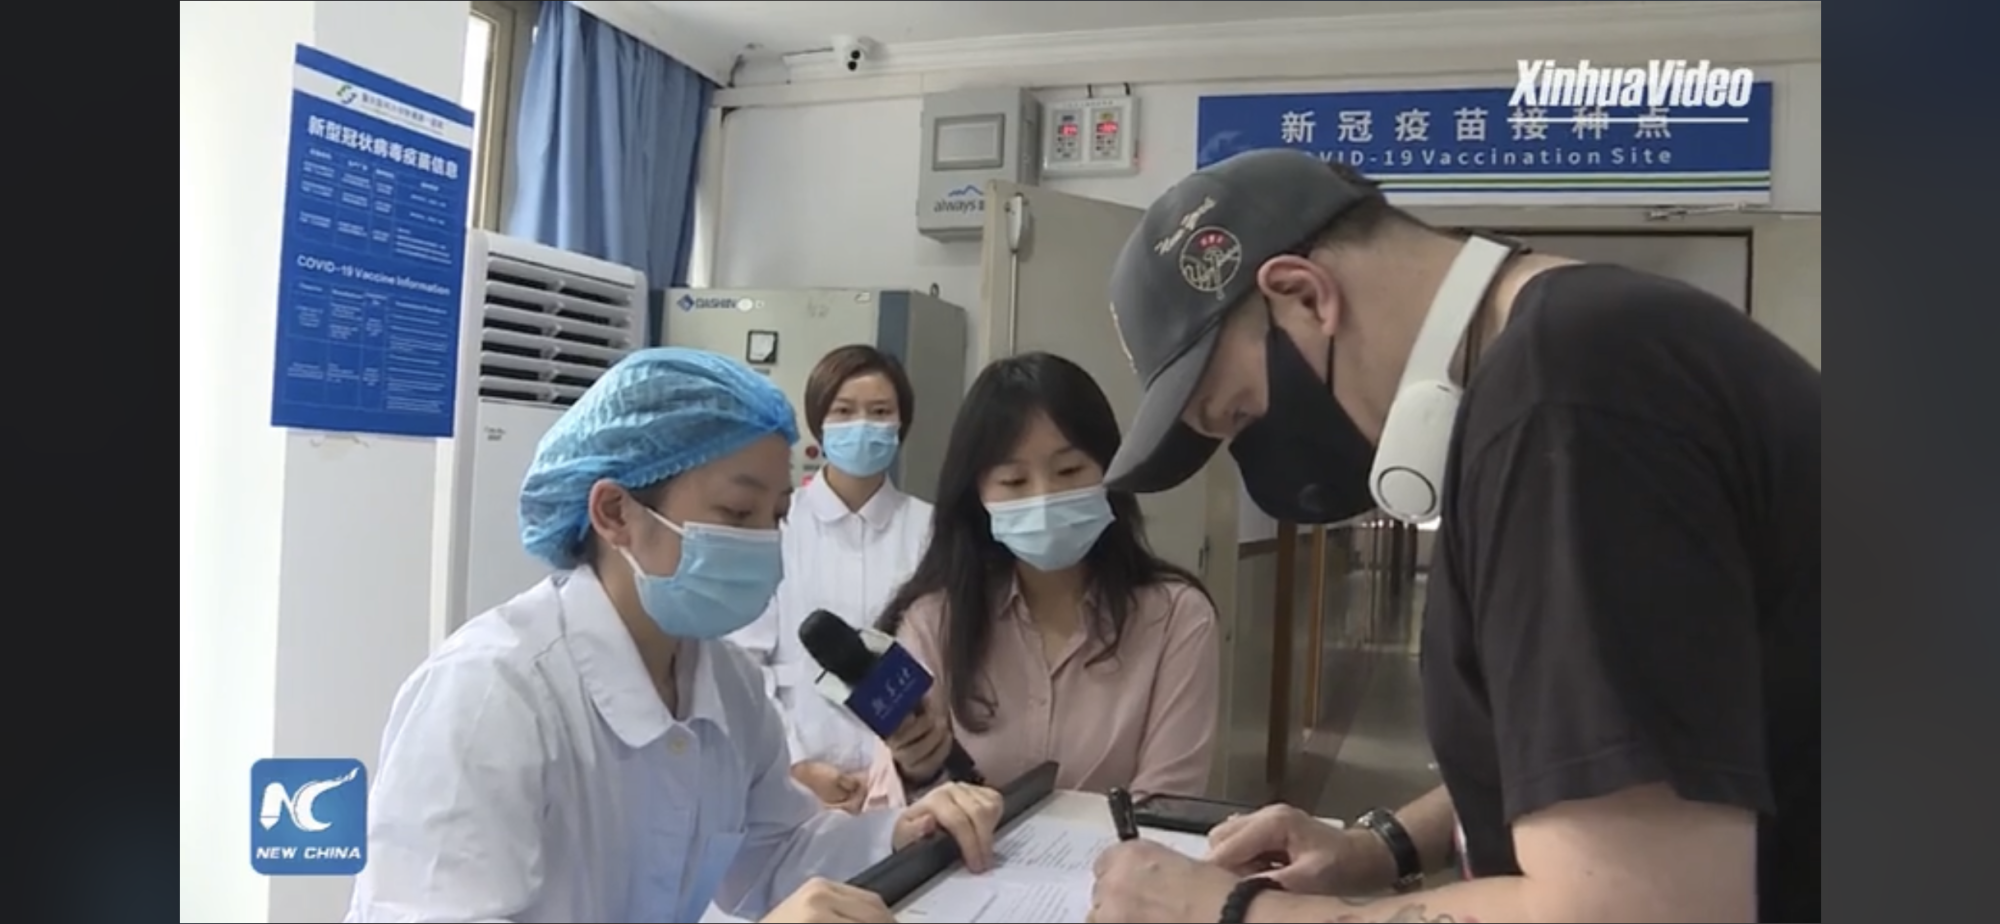 Kai gets his vaccine live streamed on Xinhua News and then interviews with iChongqing.